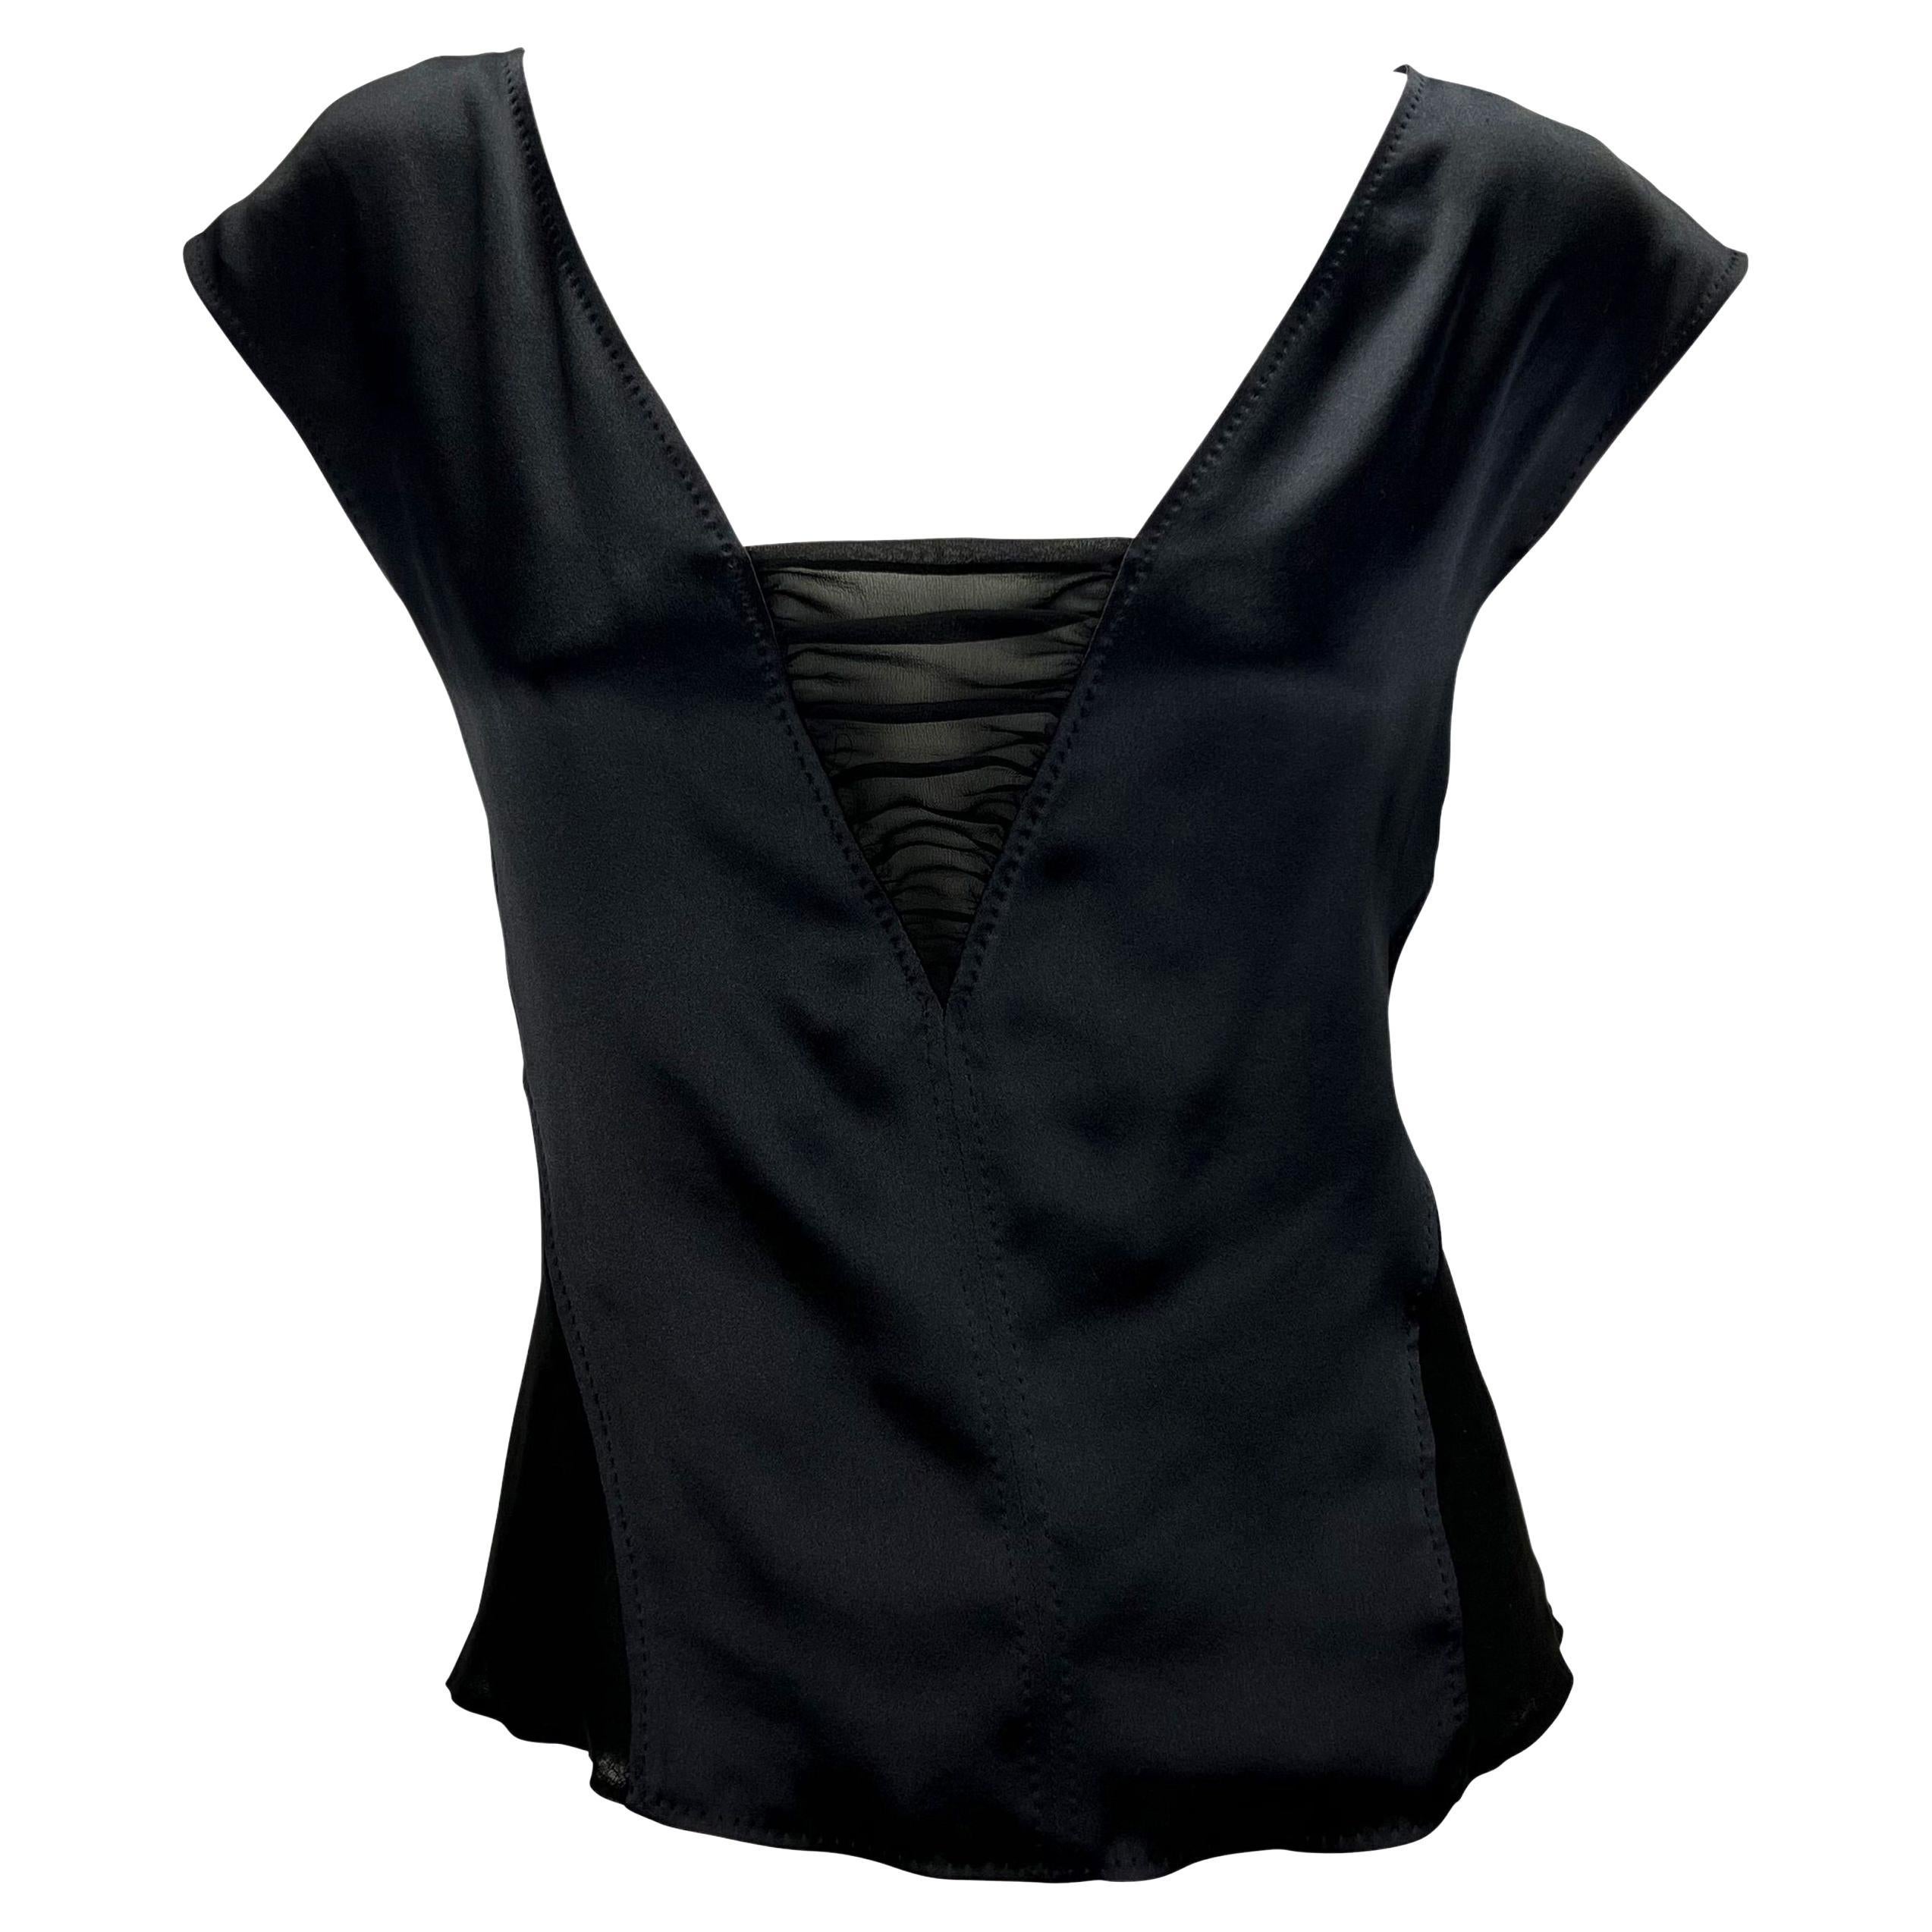 2000s Yves Saint Laurent by Tom Ford Black Satin Panel Sheer Plunging Top